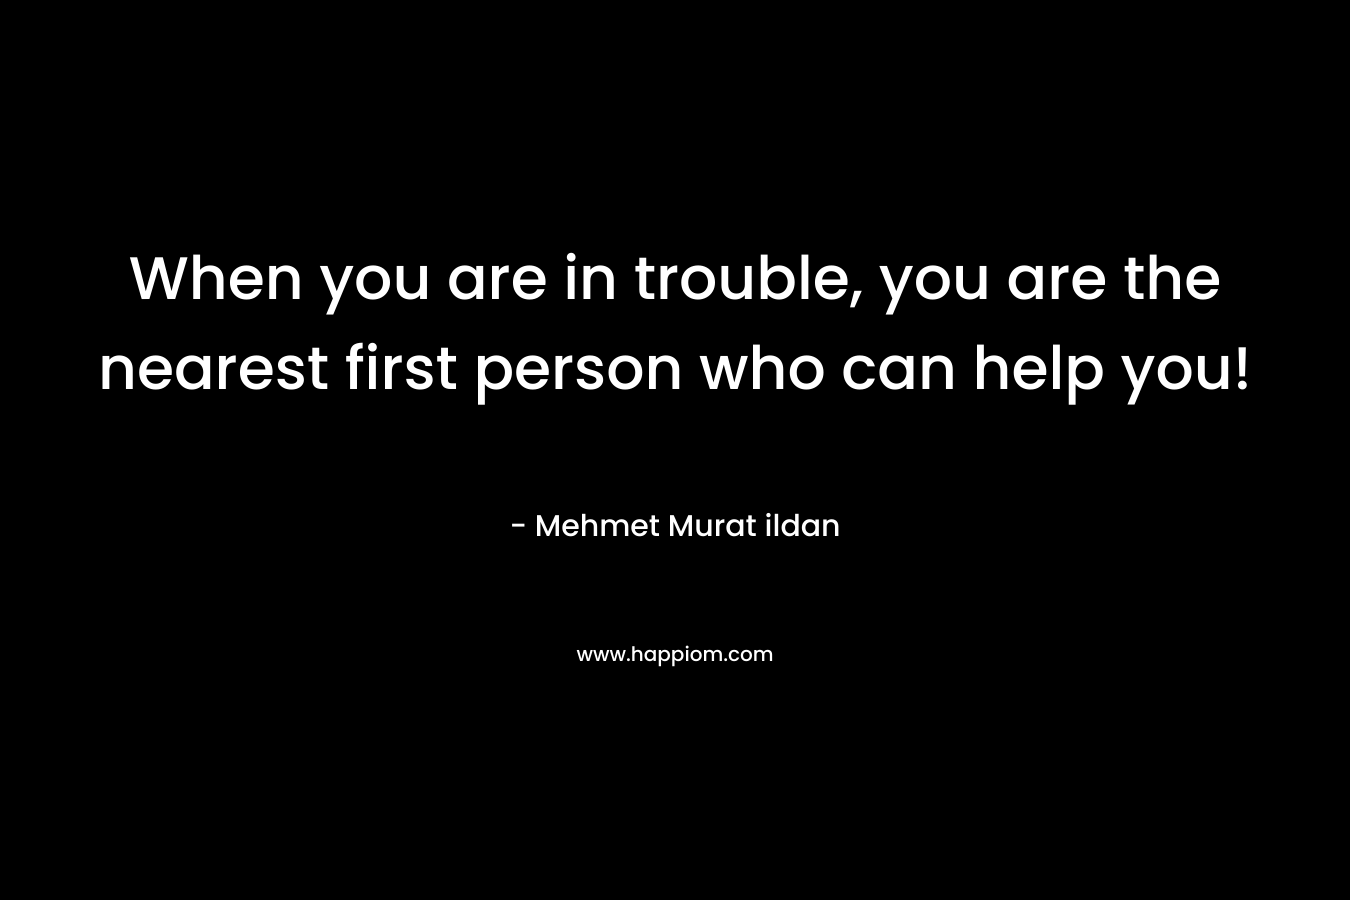 When you are in trouble, you are the nearest first person who can help you!